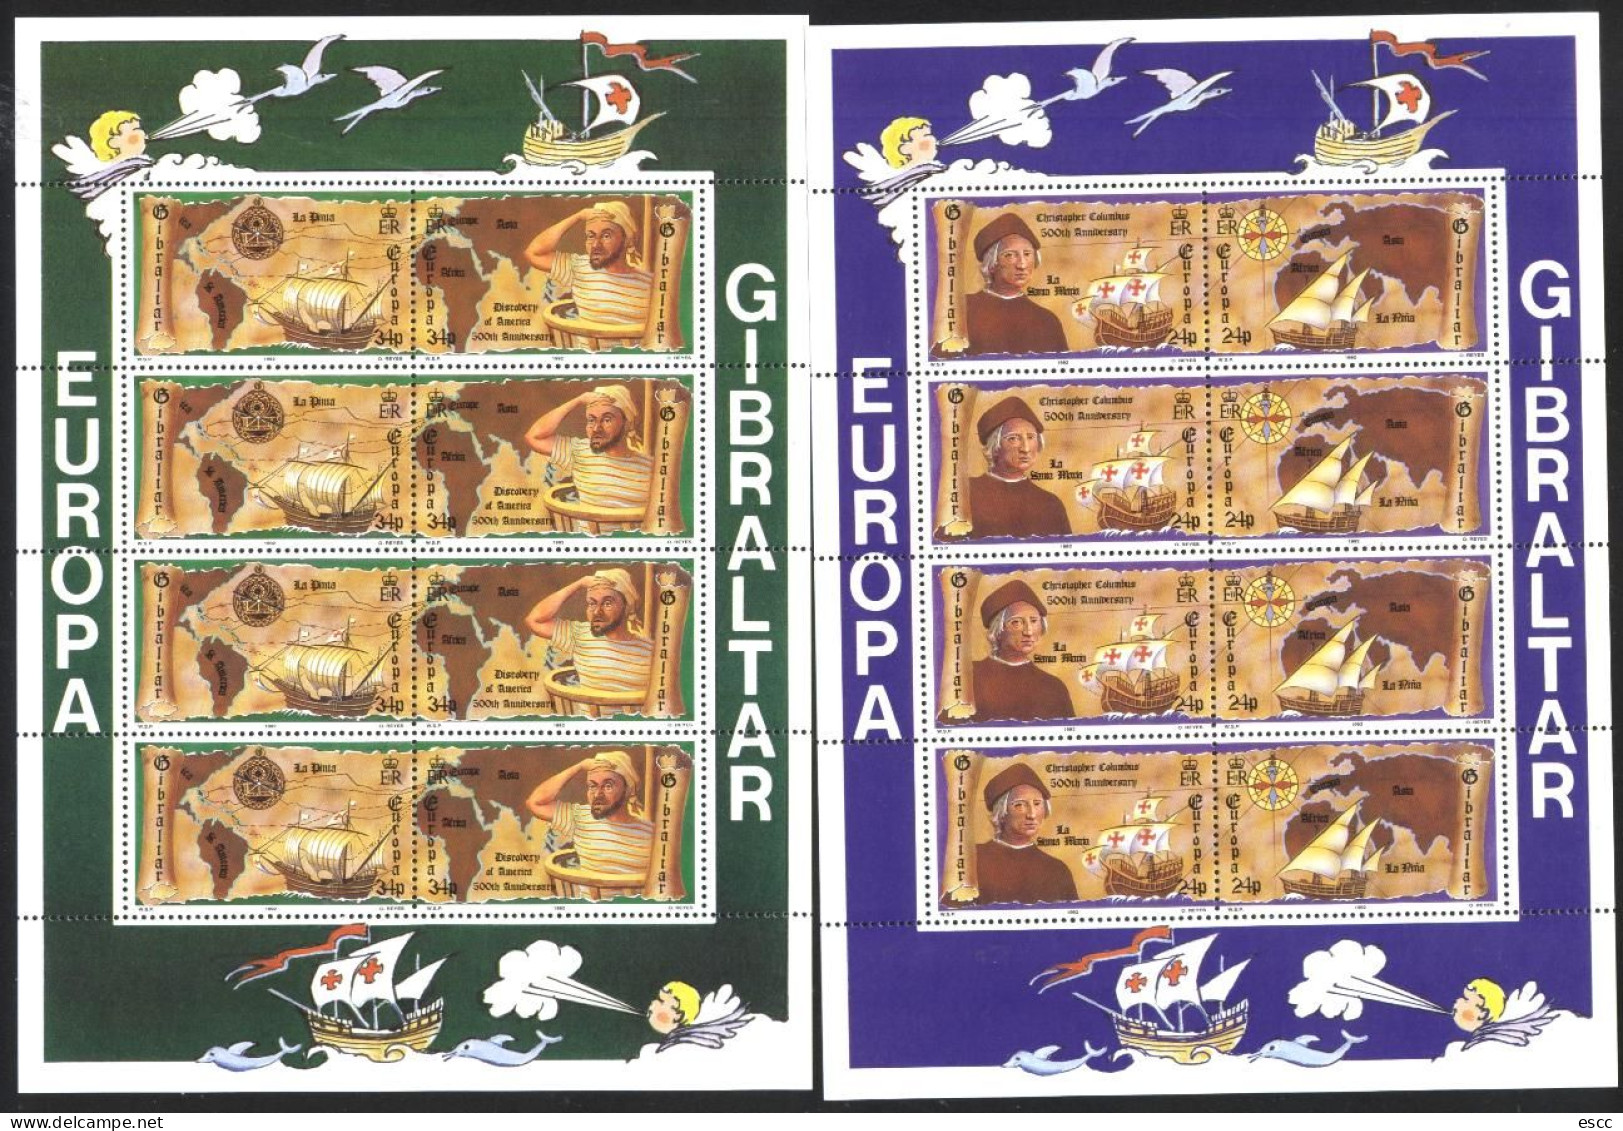 Mint Stamps In Min. Sheets Europa CEPT 1992 From Gibraltar - 1992